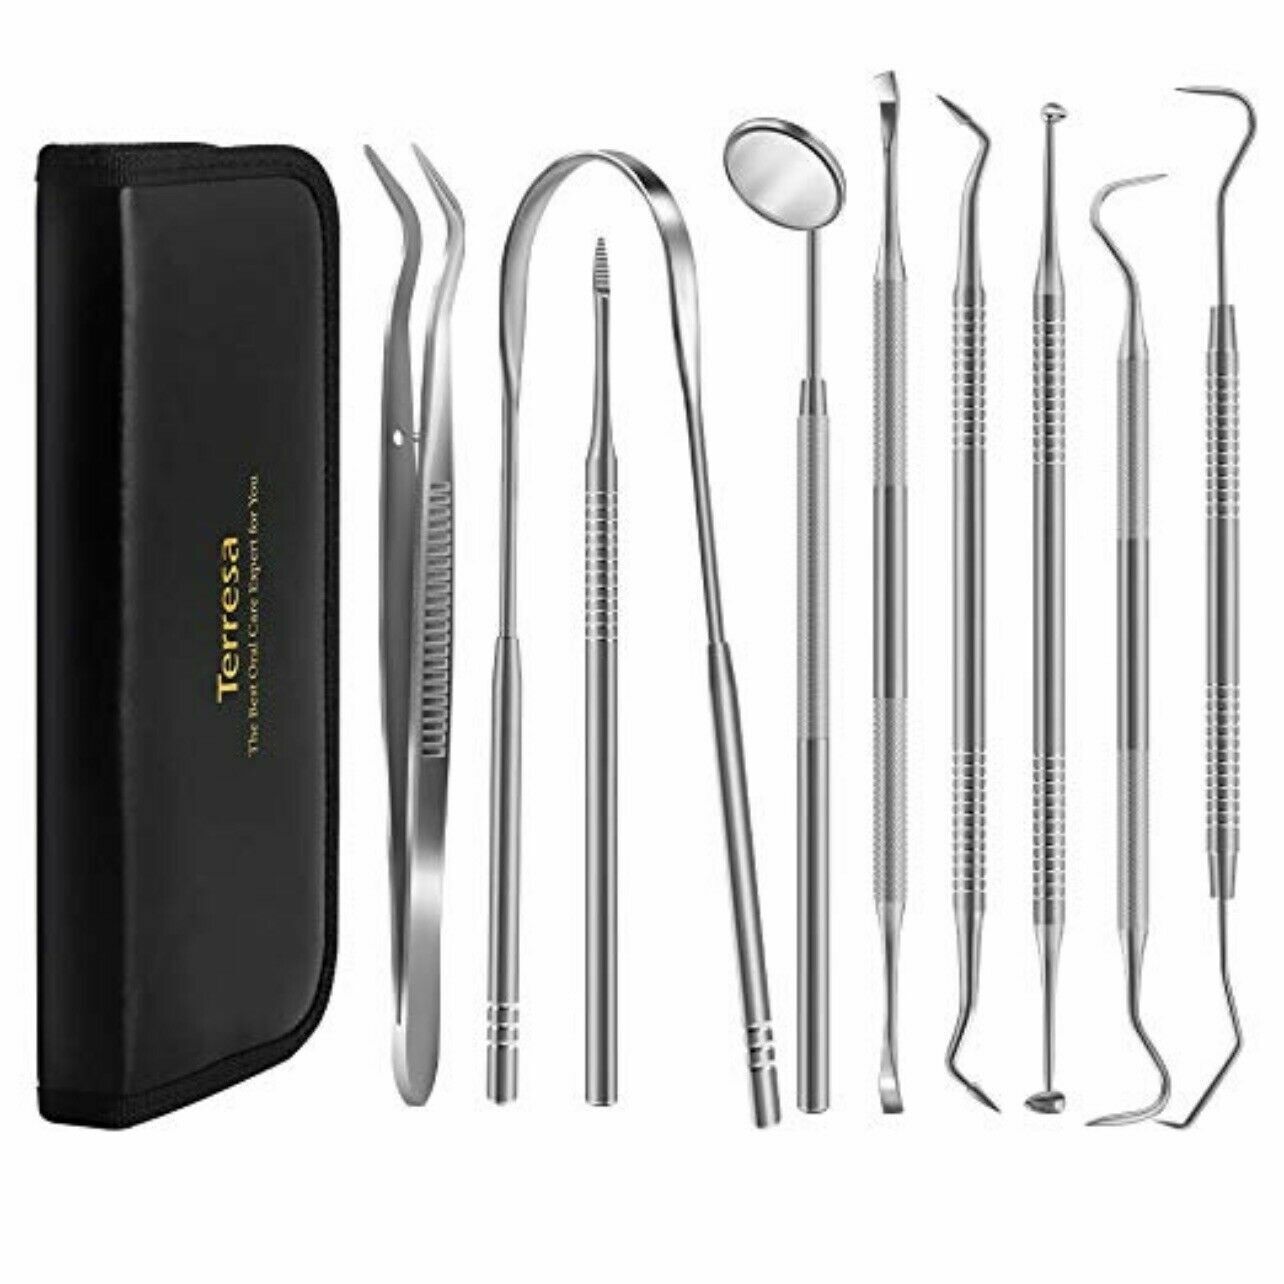 Dental Tooth Cleaning Kit Dentist Scraper Pick Tool Calculus Plaque Flos Remover TERRESA Does Not Apply - фотография #2